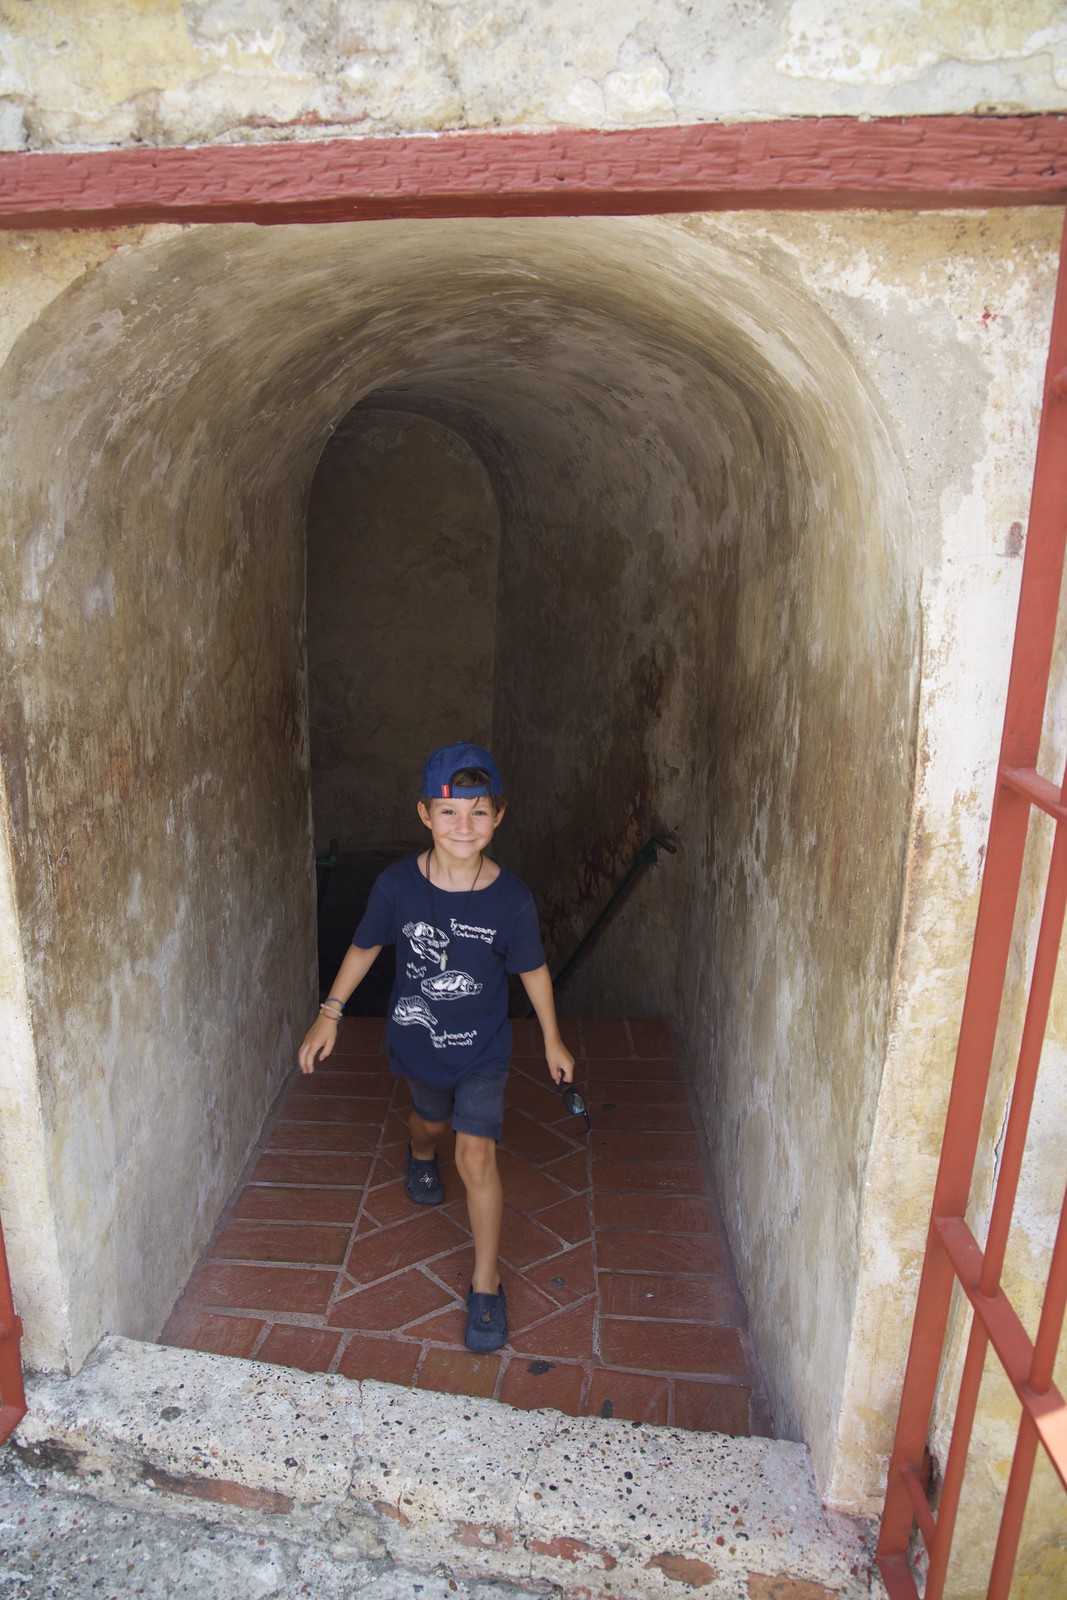 Boy stepping out of one of the tunnels in the fortress